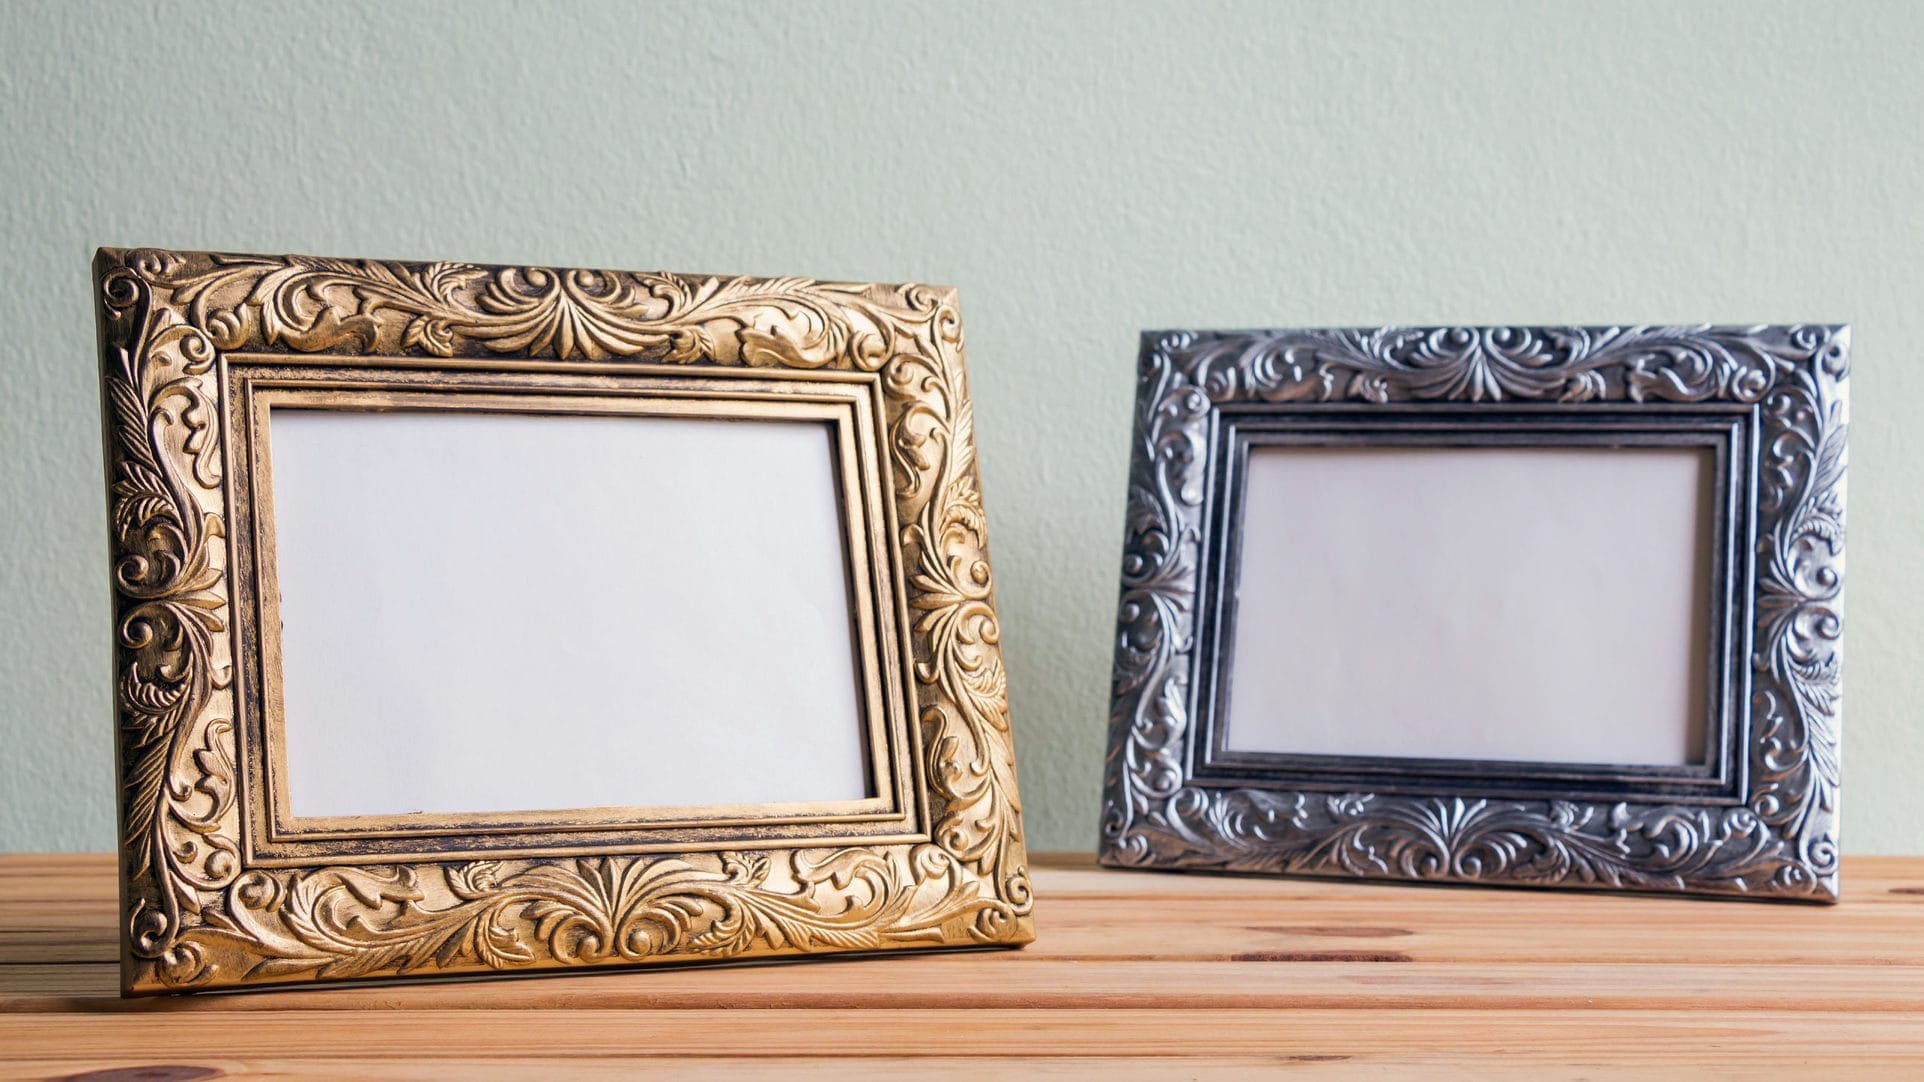 Use circle motions to prevent damaging your Both Gold and Silver Ornate Frame